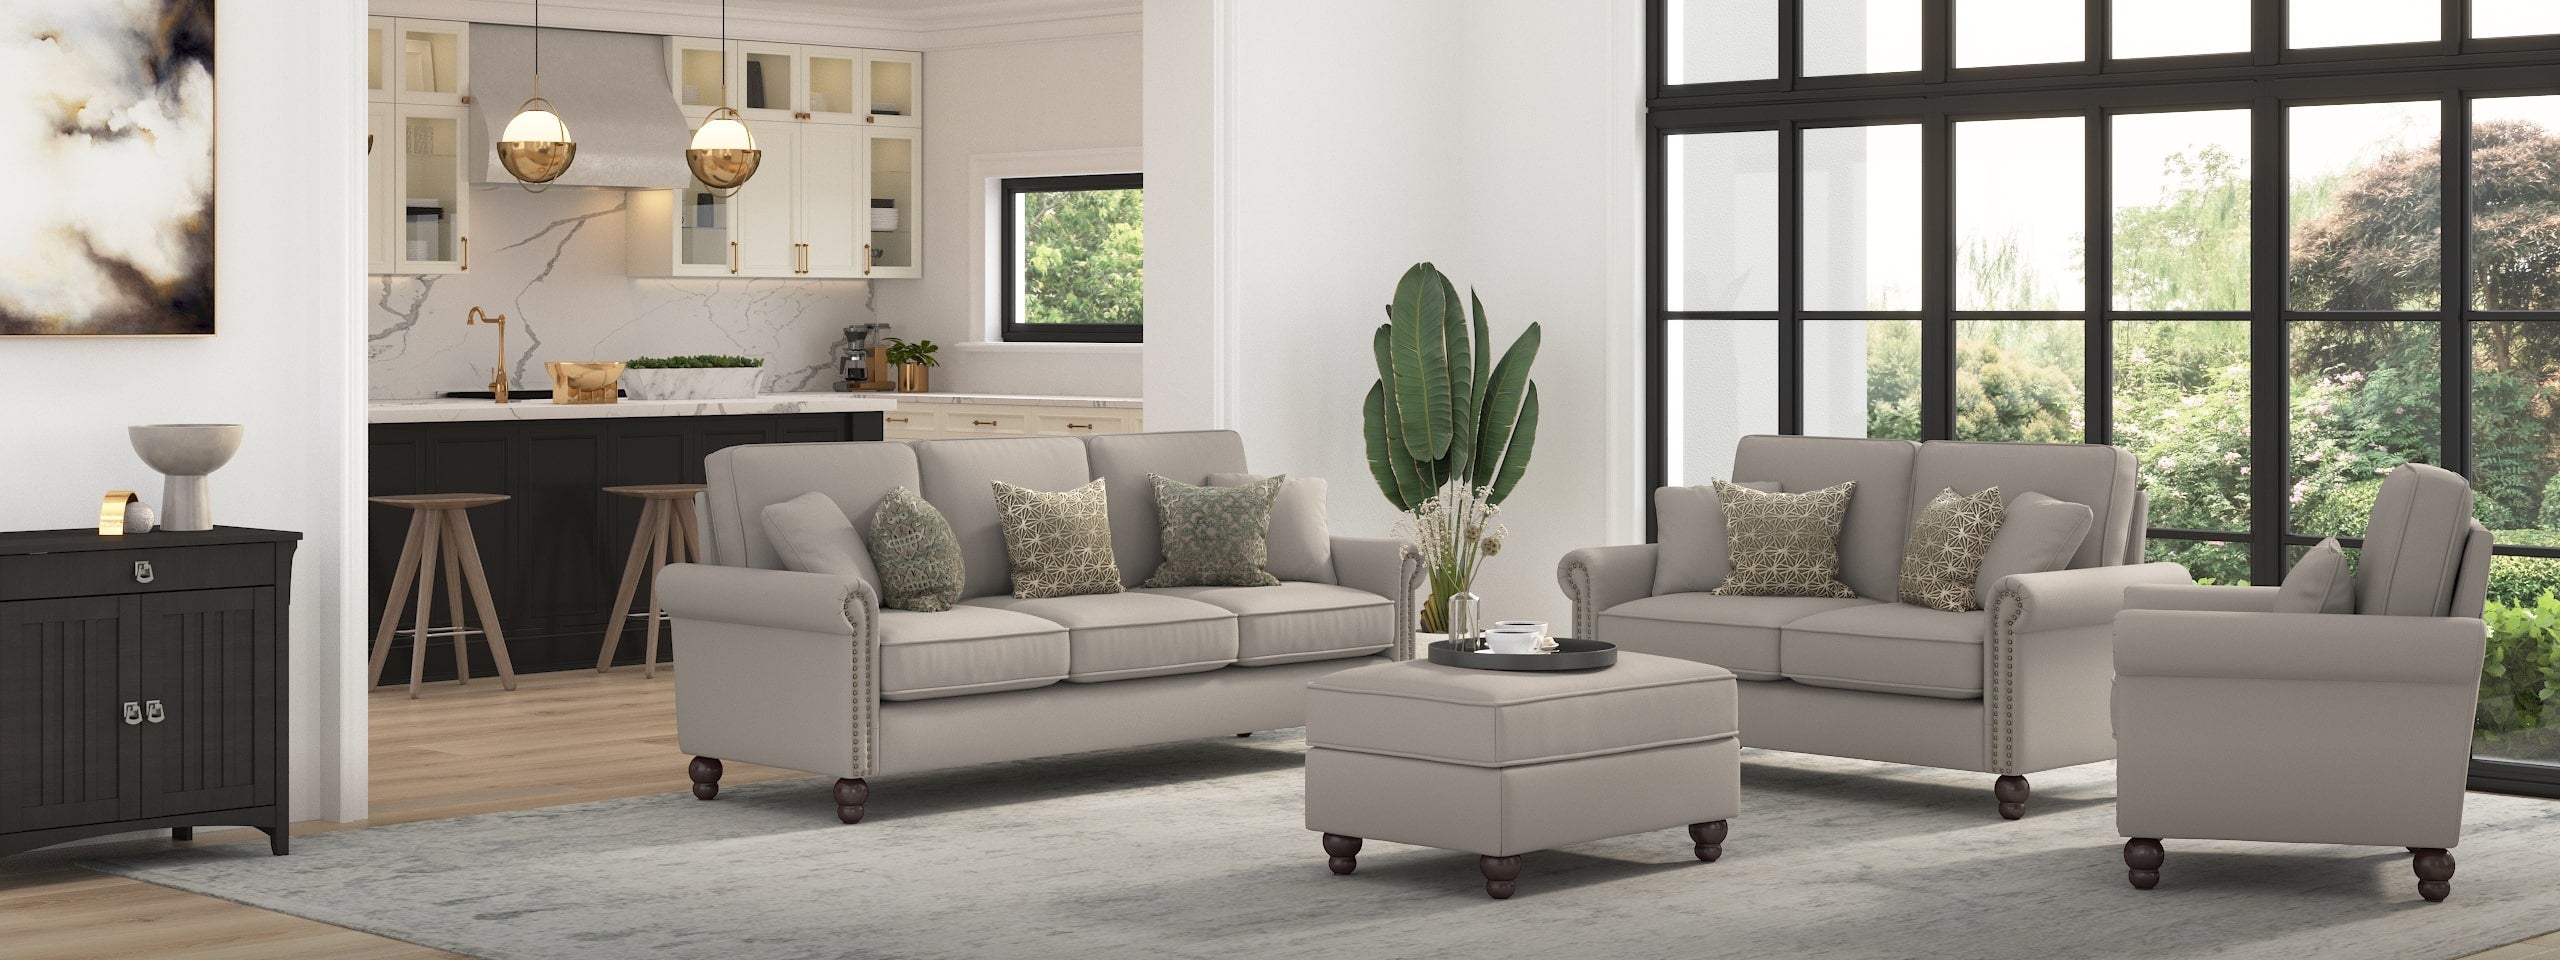 Coventry Sofas & Couches Collection